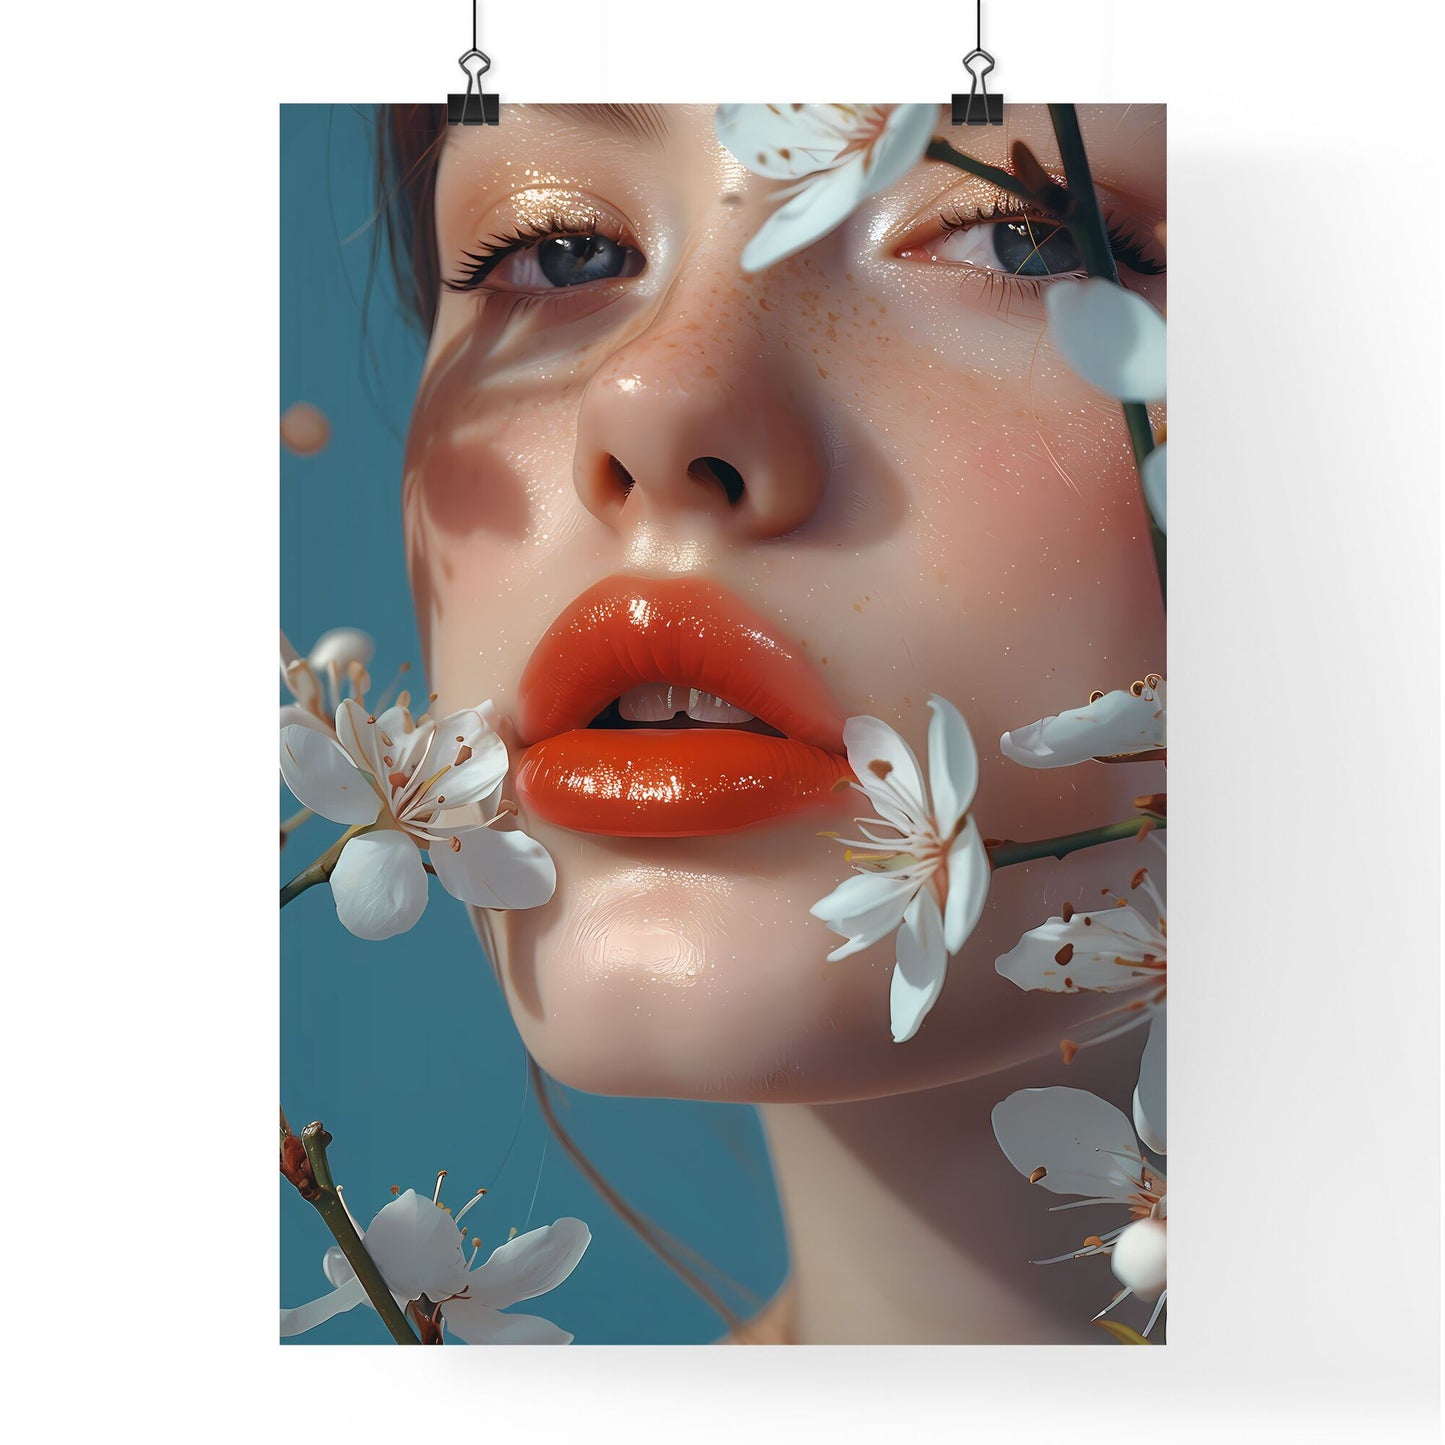 Artistic Delight: Luscious Lips of a Girl Amidst Gentle White Blooms against a Captivating Blue Backdrop Default Title